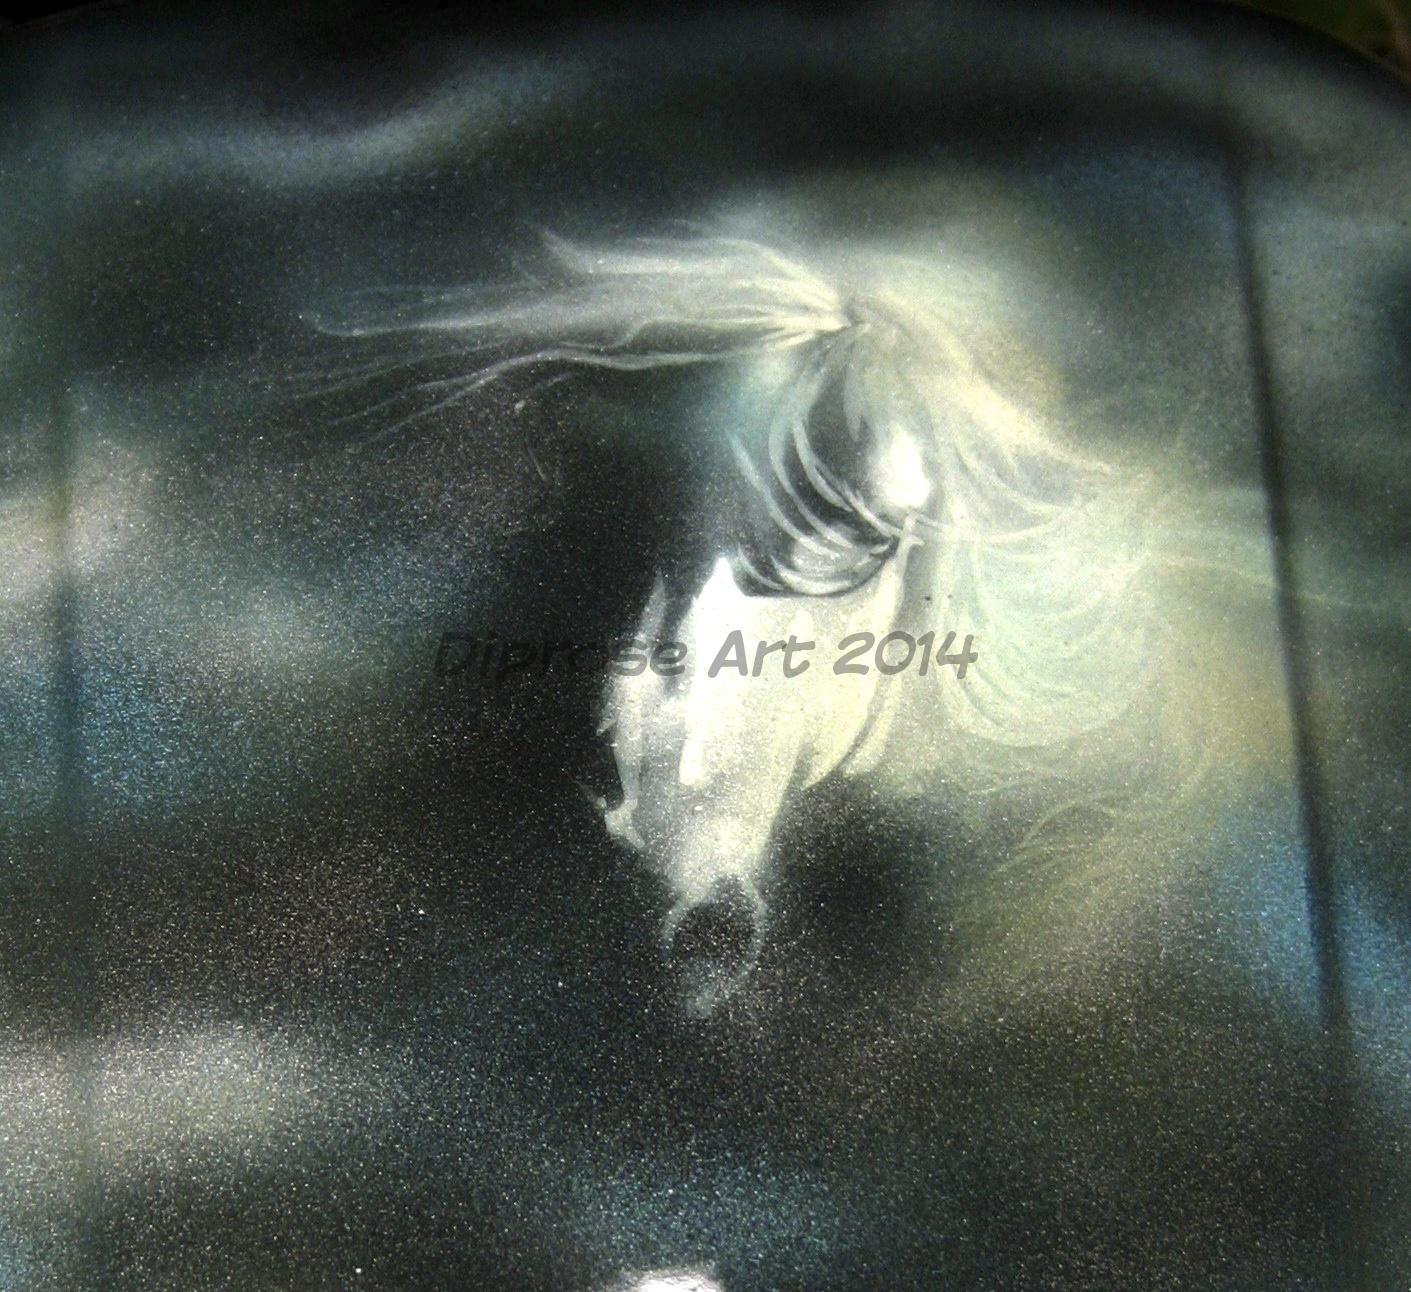 Automotive customisation - Strombringer Bike - top of tank -  ghostly grey horse who&#039;s mane is being whipped by a storm - shown after lacquer which brings out metallics